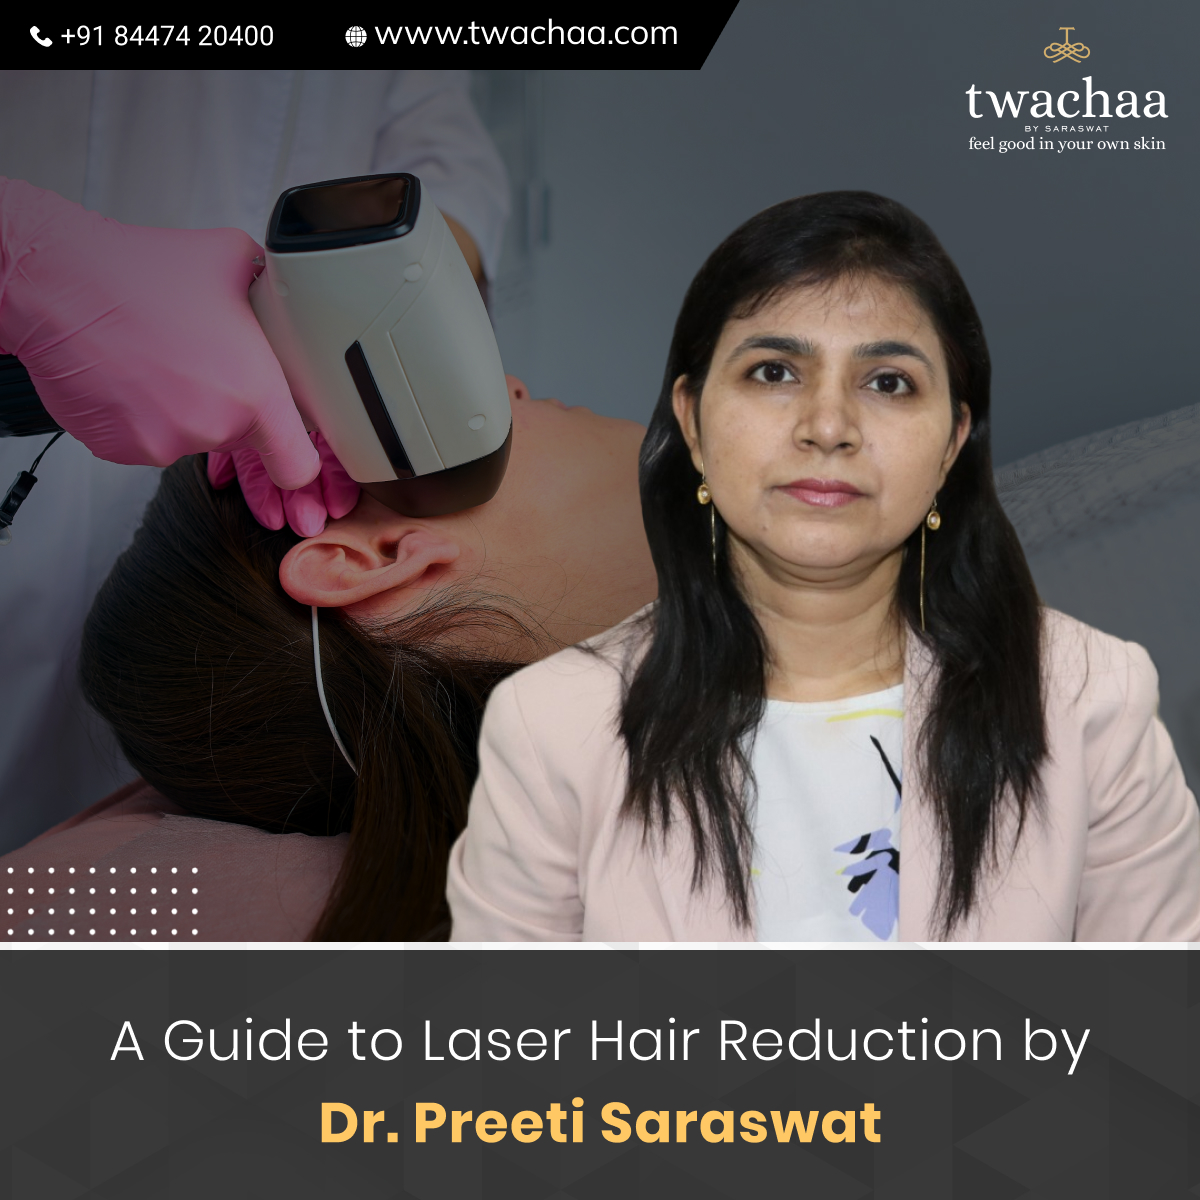 A Guide to Laser Hair Reduction by Dr.Preeti Saraswat